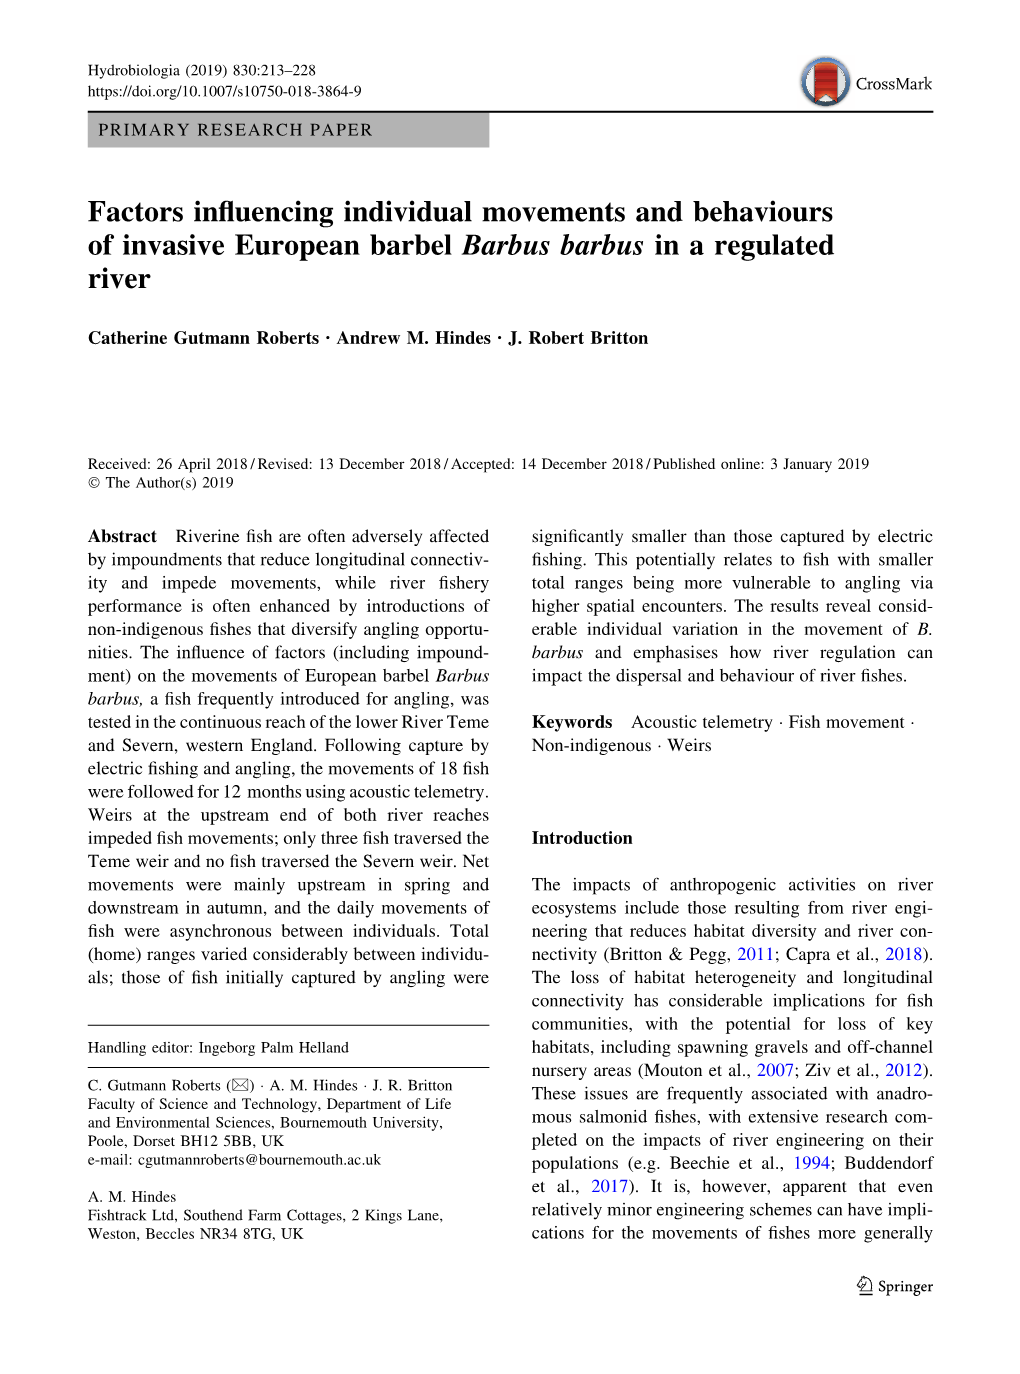 Factors Influencing Individual Movements and Behaviours Of